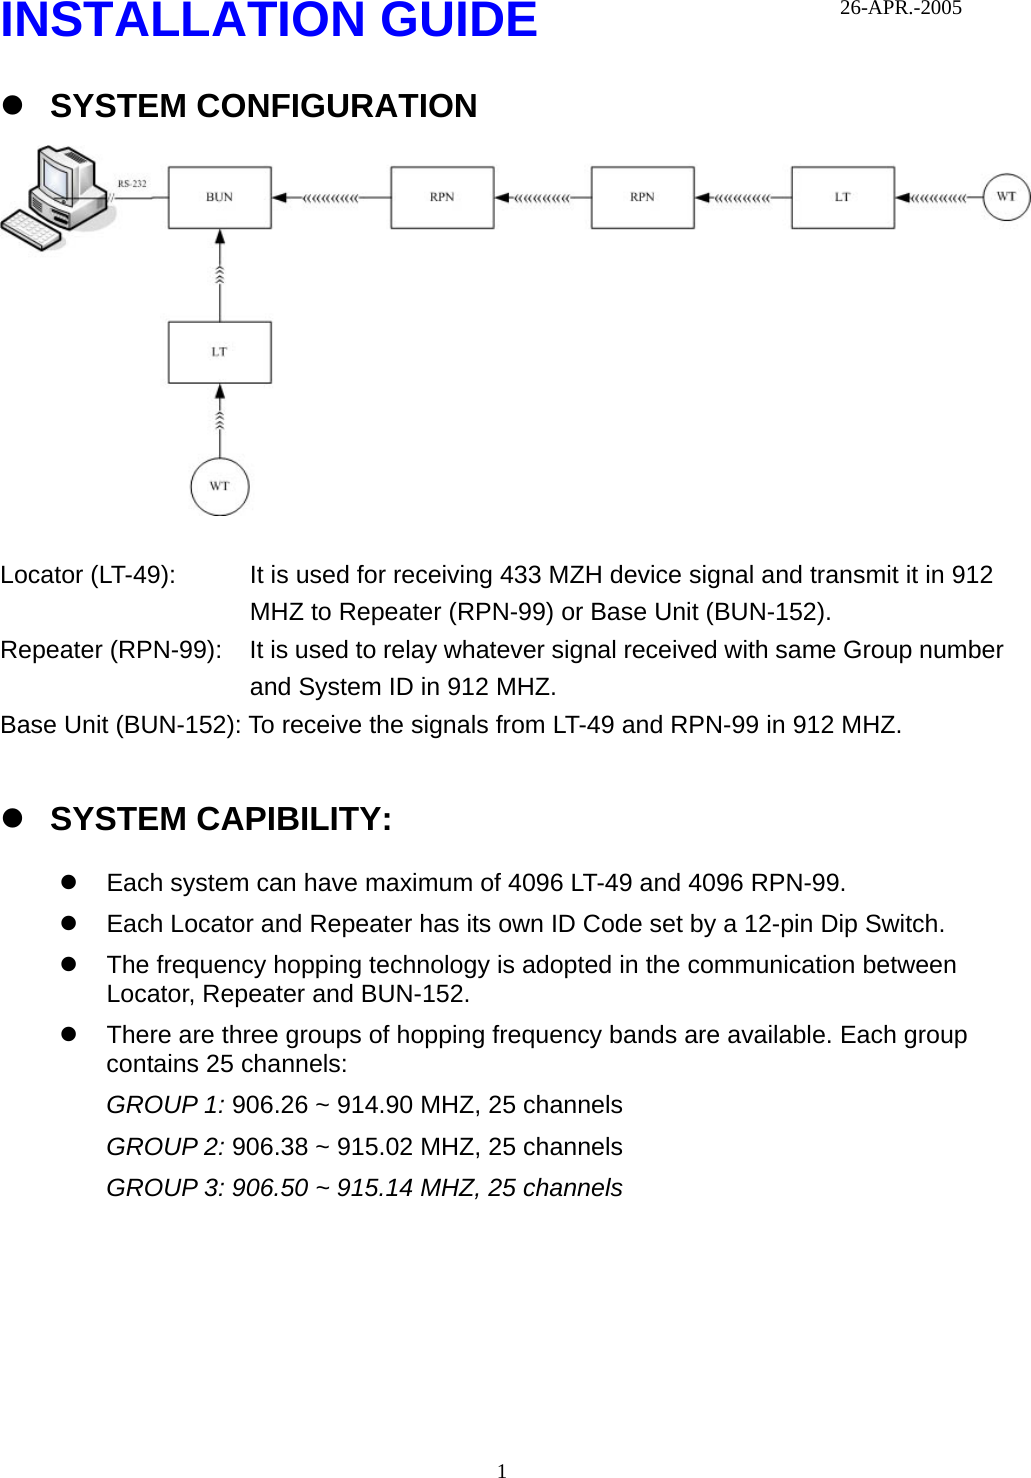  1INSTALLATION GUIDE z SYSTEM CONFIGURATION   Locator (LT-49):  It is used for receiving 433 MZH device signal and transmit it in 912 MHZ to Repeater (RPN-99) or Base Unit (BUN-152). Repeater (RPN-99):  It is used to relay whatever signal received with same Group number and System ID in 912 MHZ. Base Unit (BUN-152): To receive the signals from LT-49 and RPN-99 in 912 MHZ.  z SYSTEM CAPIBILITY: z  Each system can have maximum of 4096 LT-49 and 4096 RPN-99.   z  Each Locator and Repeater has its own ID Code set by a 12-pin Dip Switch. z  The frequency hopping technology is adopted in the communication between Locator, Repeater and BUN-152.   z  There are three groups of hopping frequency bands are available. Each group contains 25 channels: GROUP 1: 906.26 ~ 914.90 MHZ, 25 channels GROUP 2: 906.38 ~ 915.02 MHZ, 25 channels GROUP 3: 906.50 ~ 915.14 MHZ, 25 channels 26-APR.-2005 